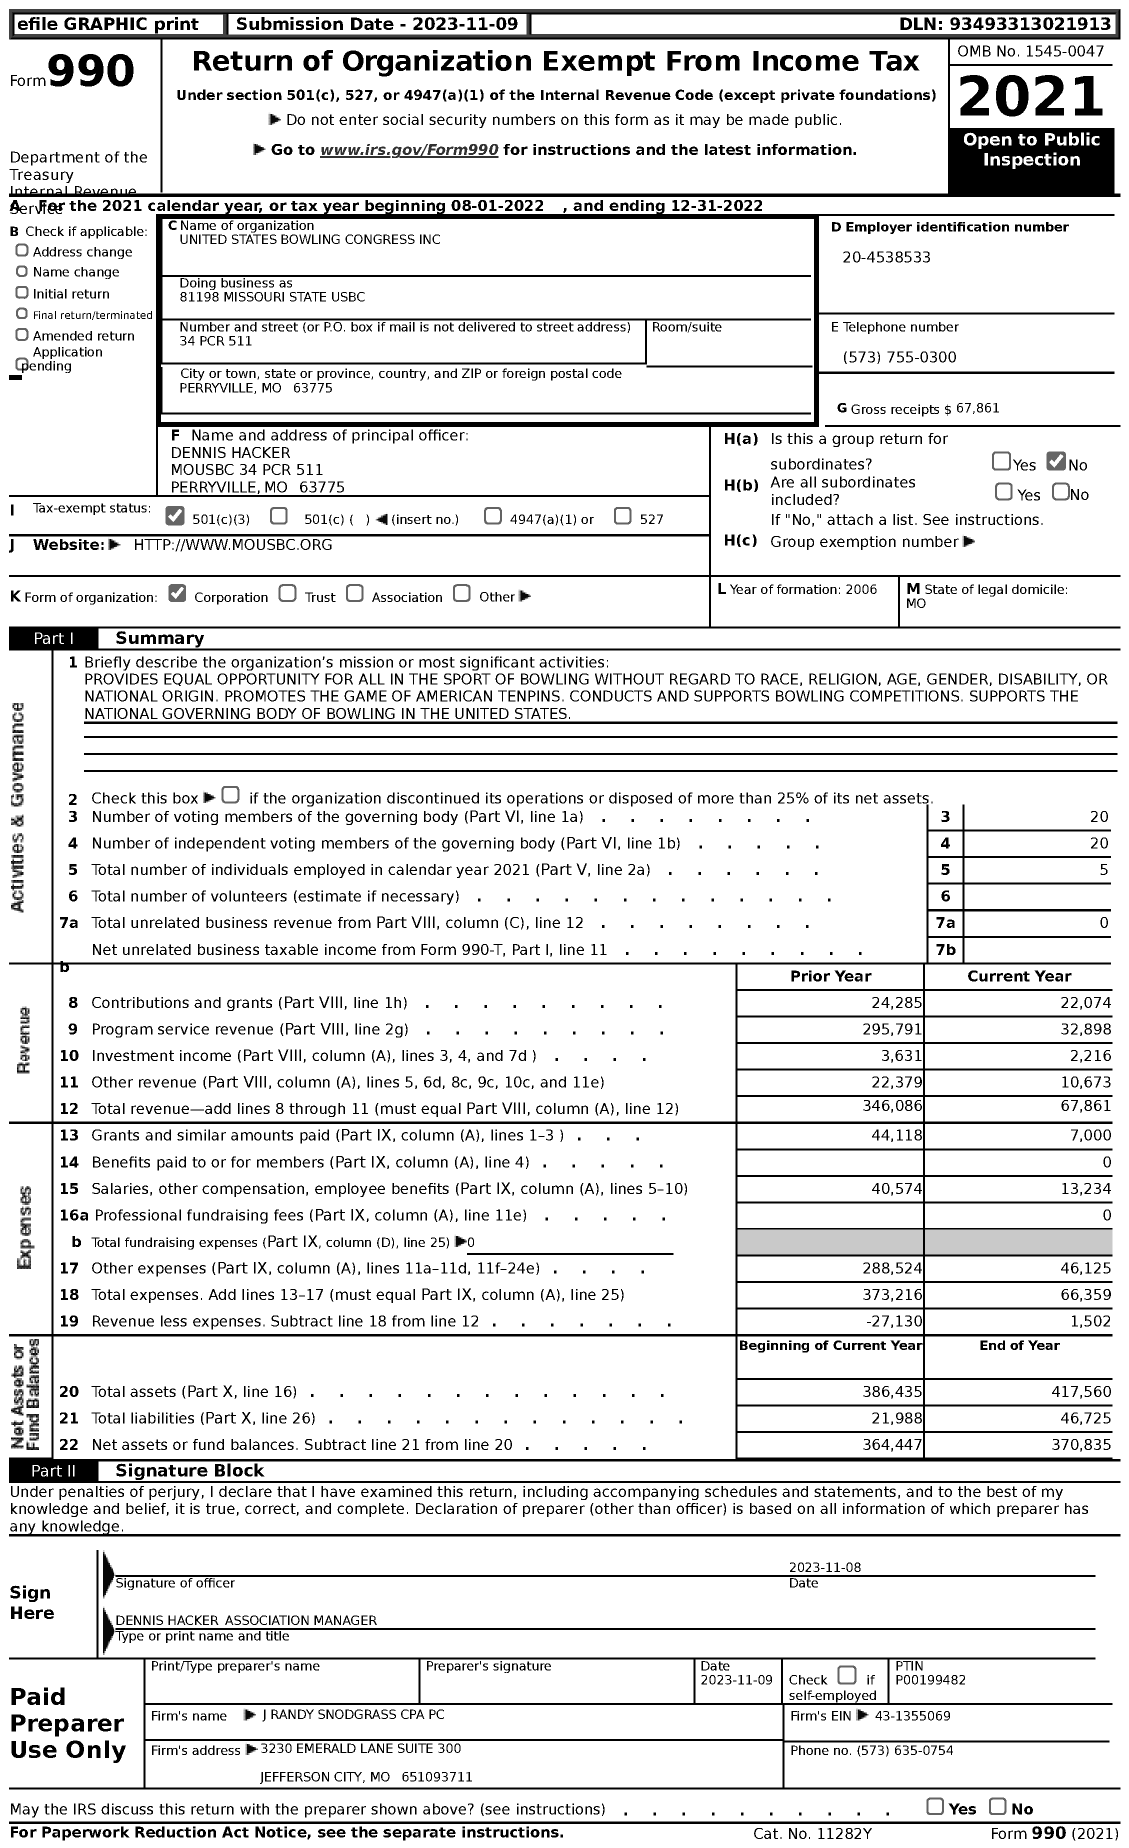 Image of first page of 2022 Form 990 for United States Bowling Congress - 81198 Missouri State Usbc